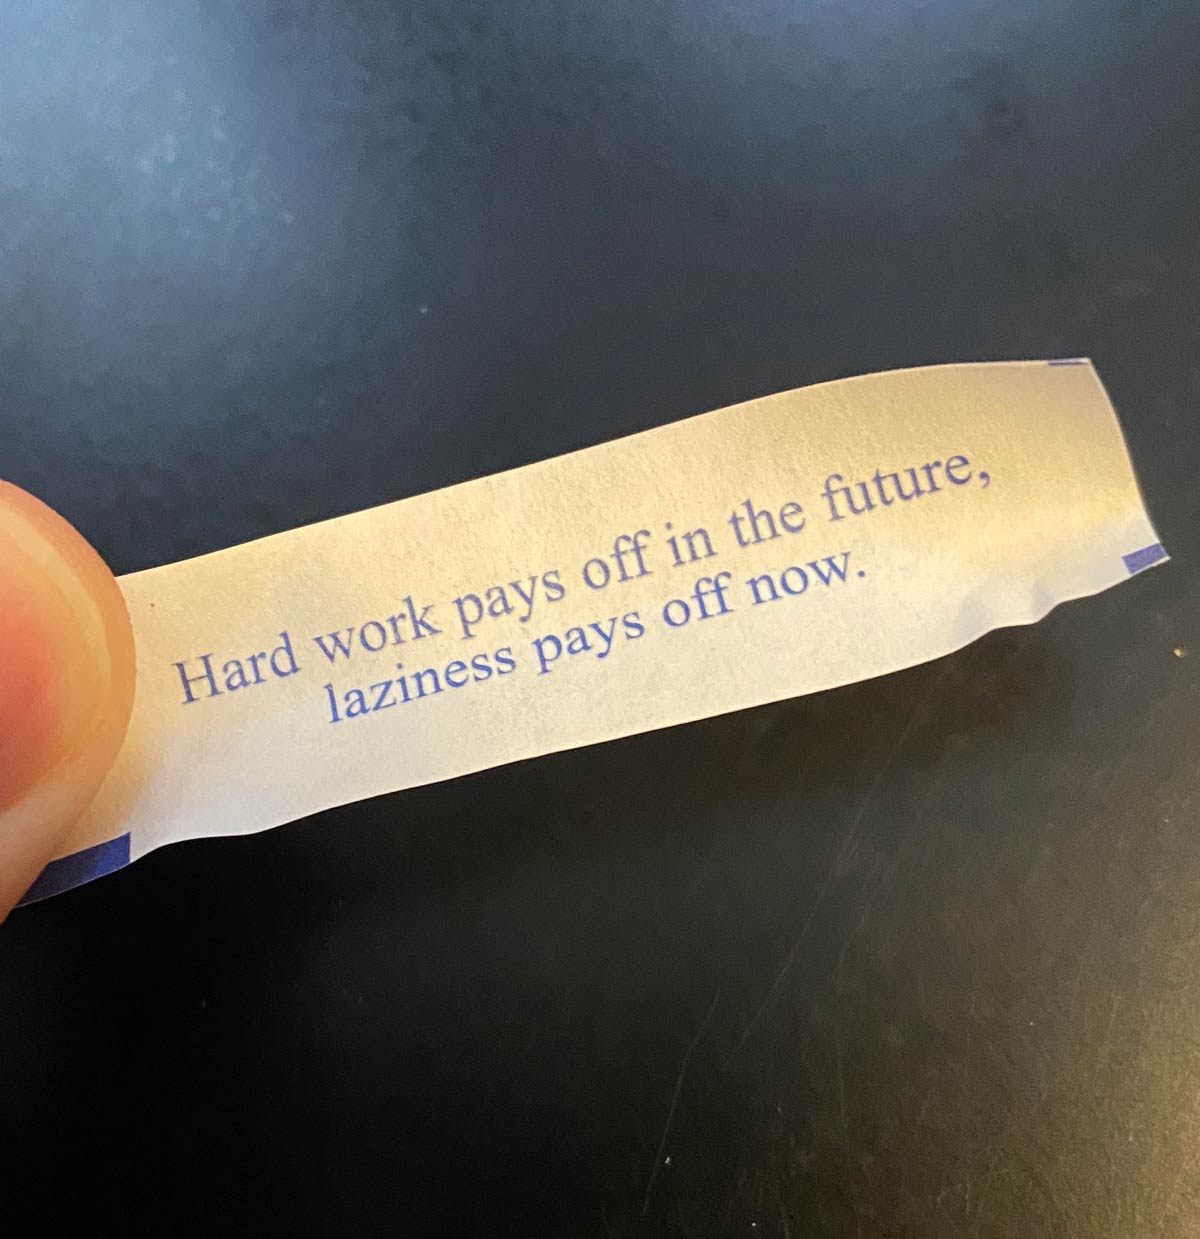 My fortune cookie gets me